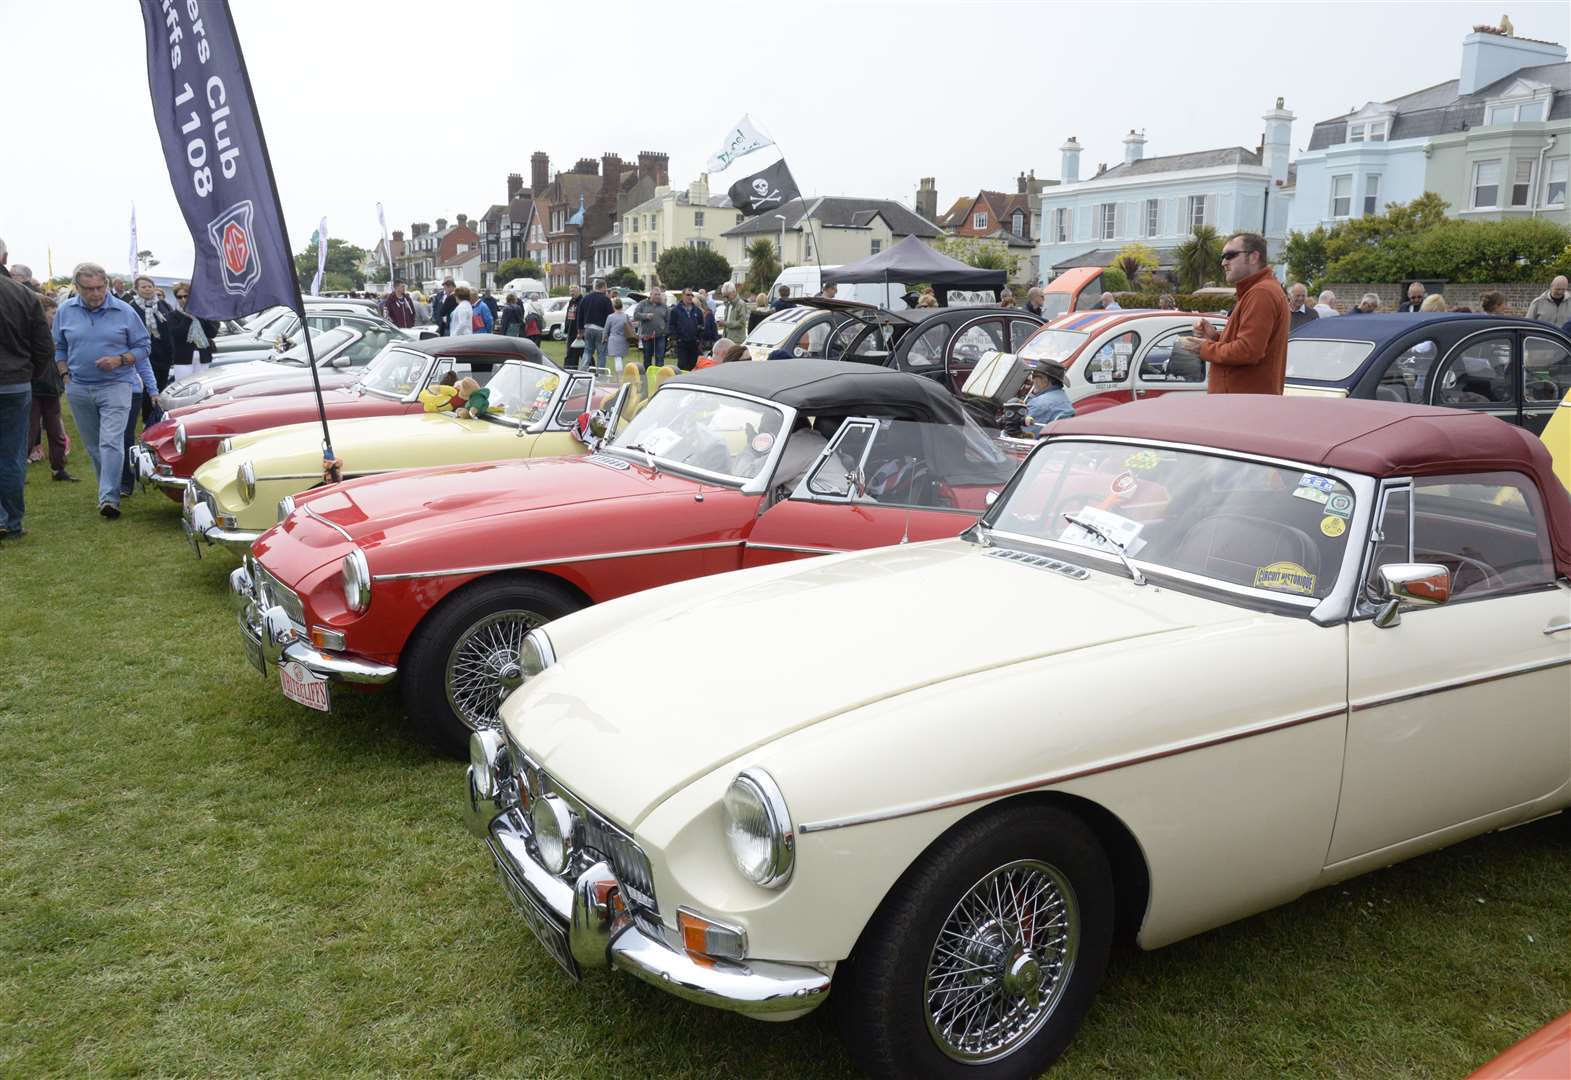 Classic cars on display at motor show